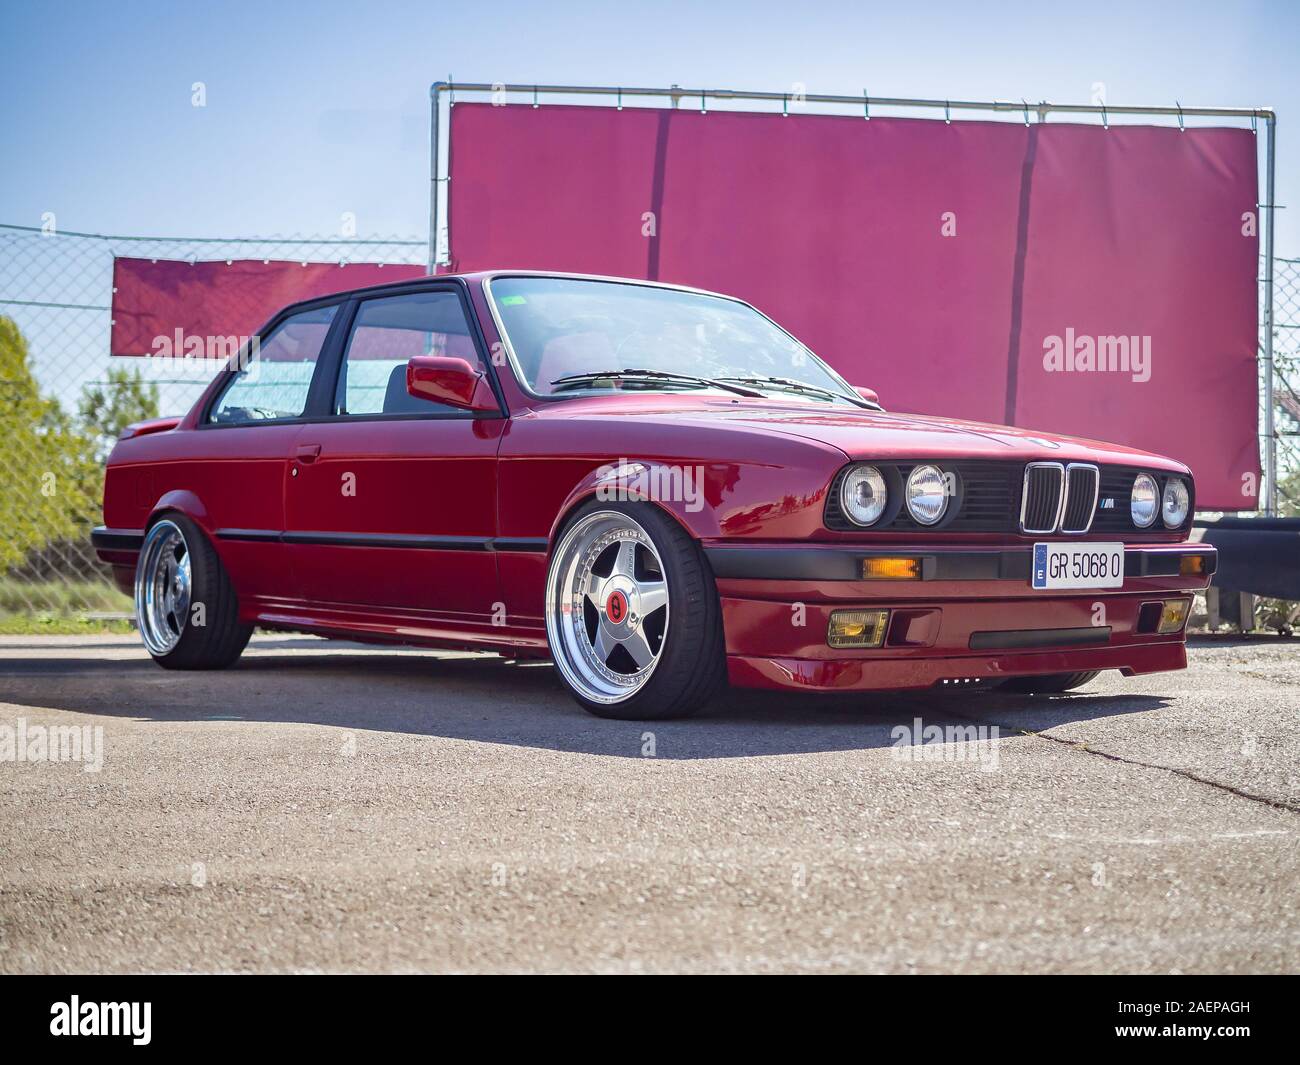 MONTMELO, SPAIN-SEPTEMBER 29, 2019: BMW 3 Series (E30) two-door sedan (Second generation of BMW 3 Series) Stock Photo